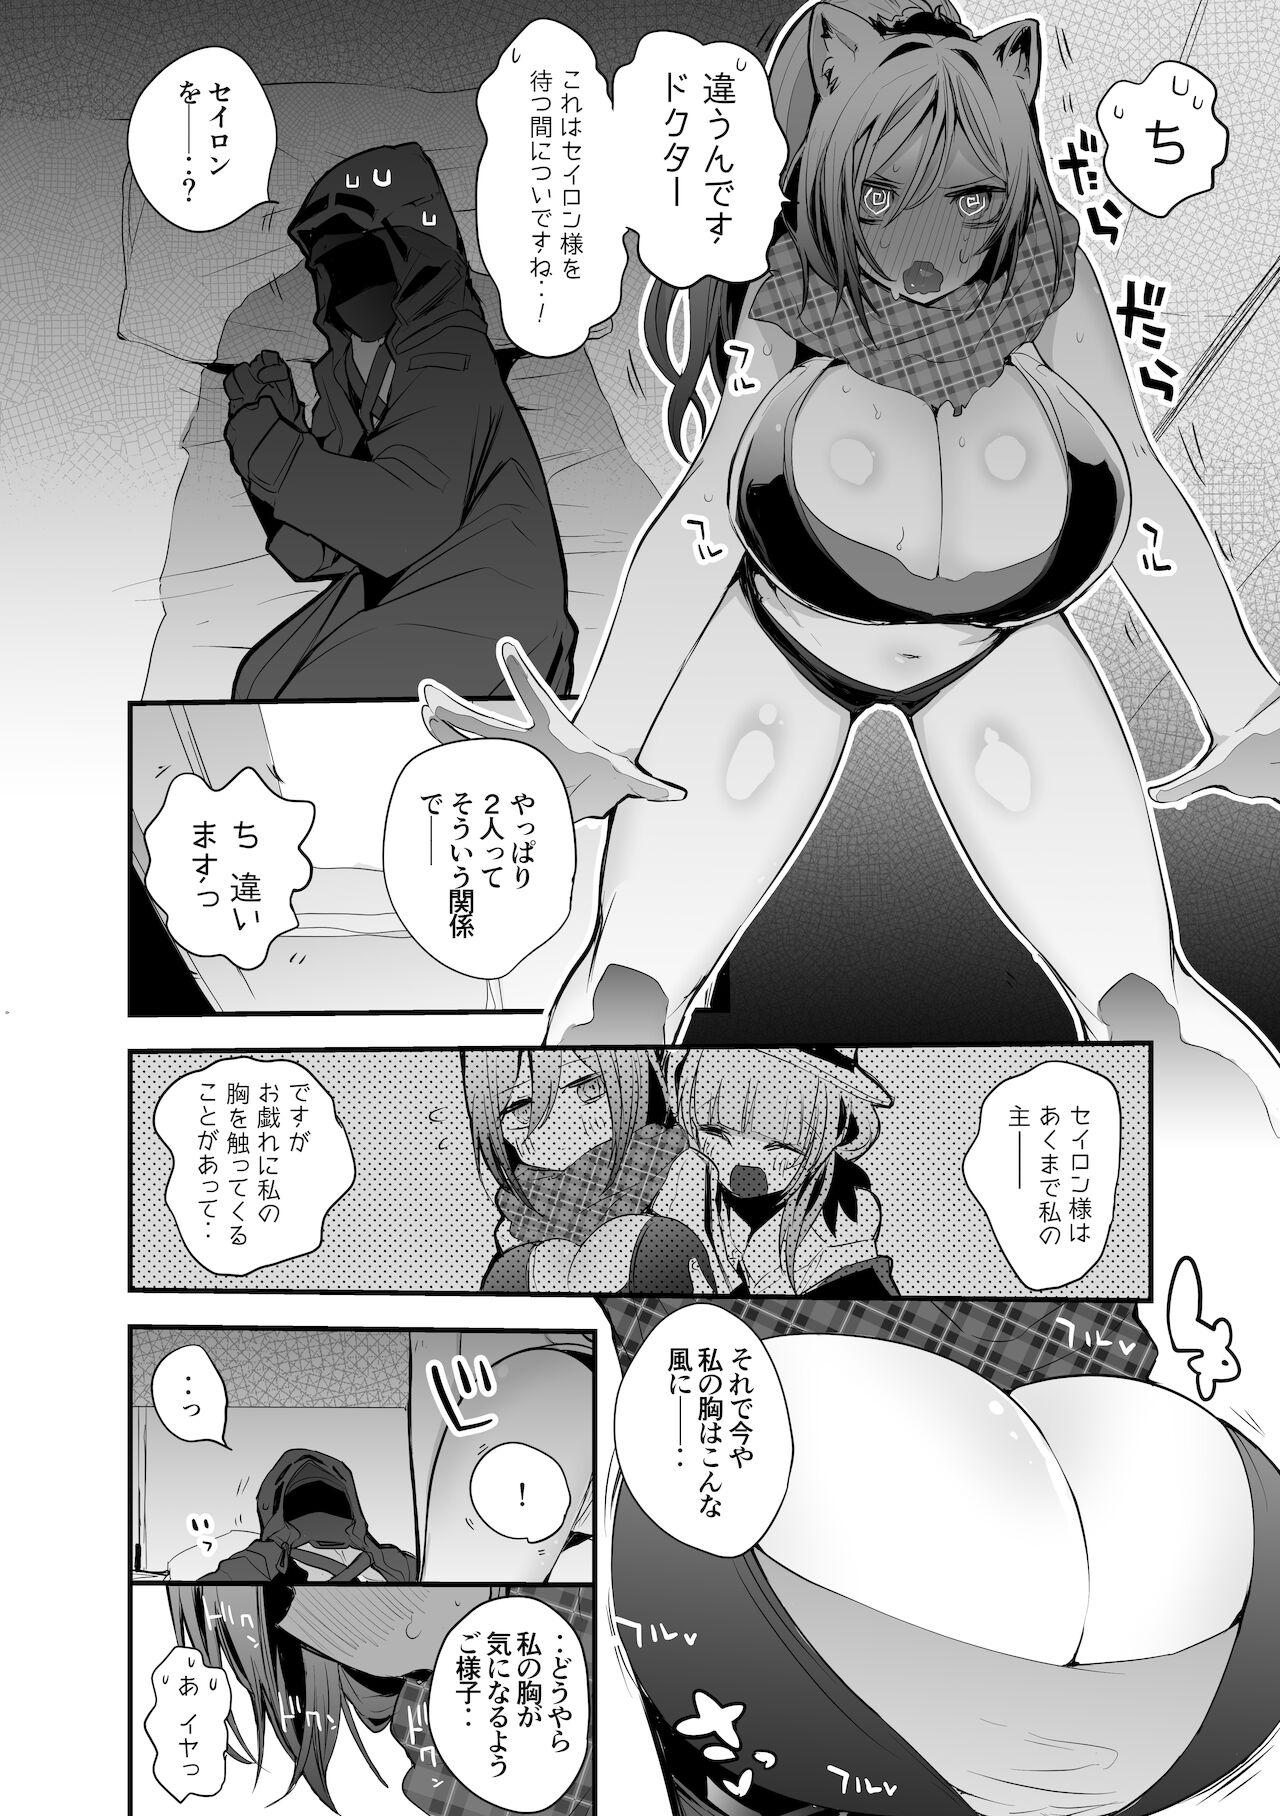 Small シュヴァルツは押し倒す編 - Arknights Gay Straight Boys - Page 3